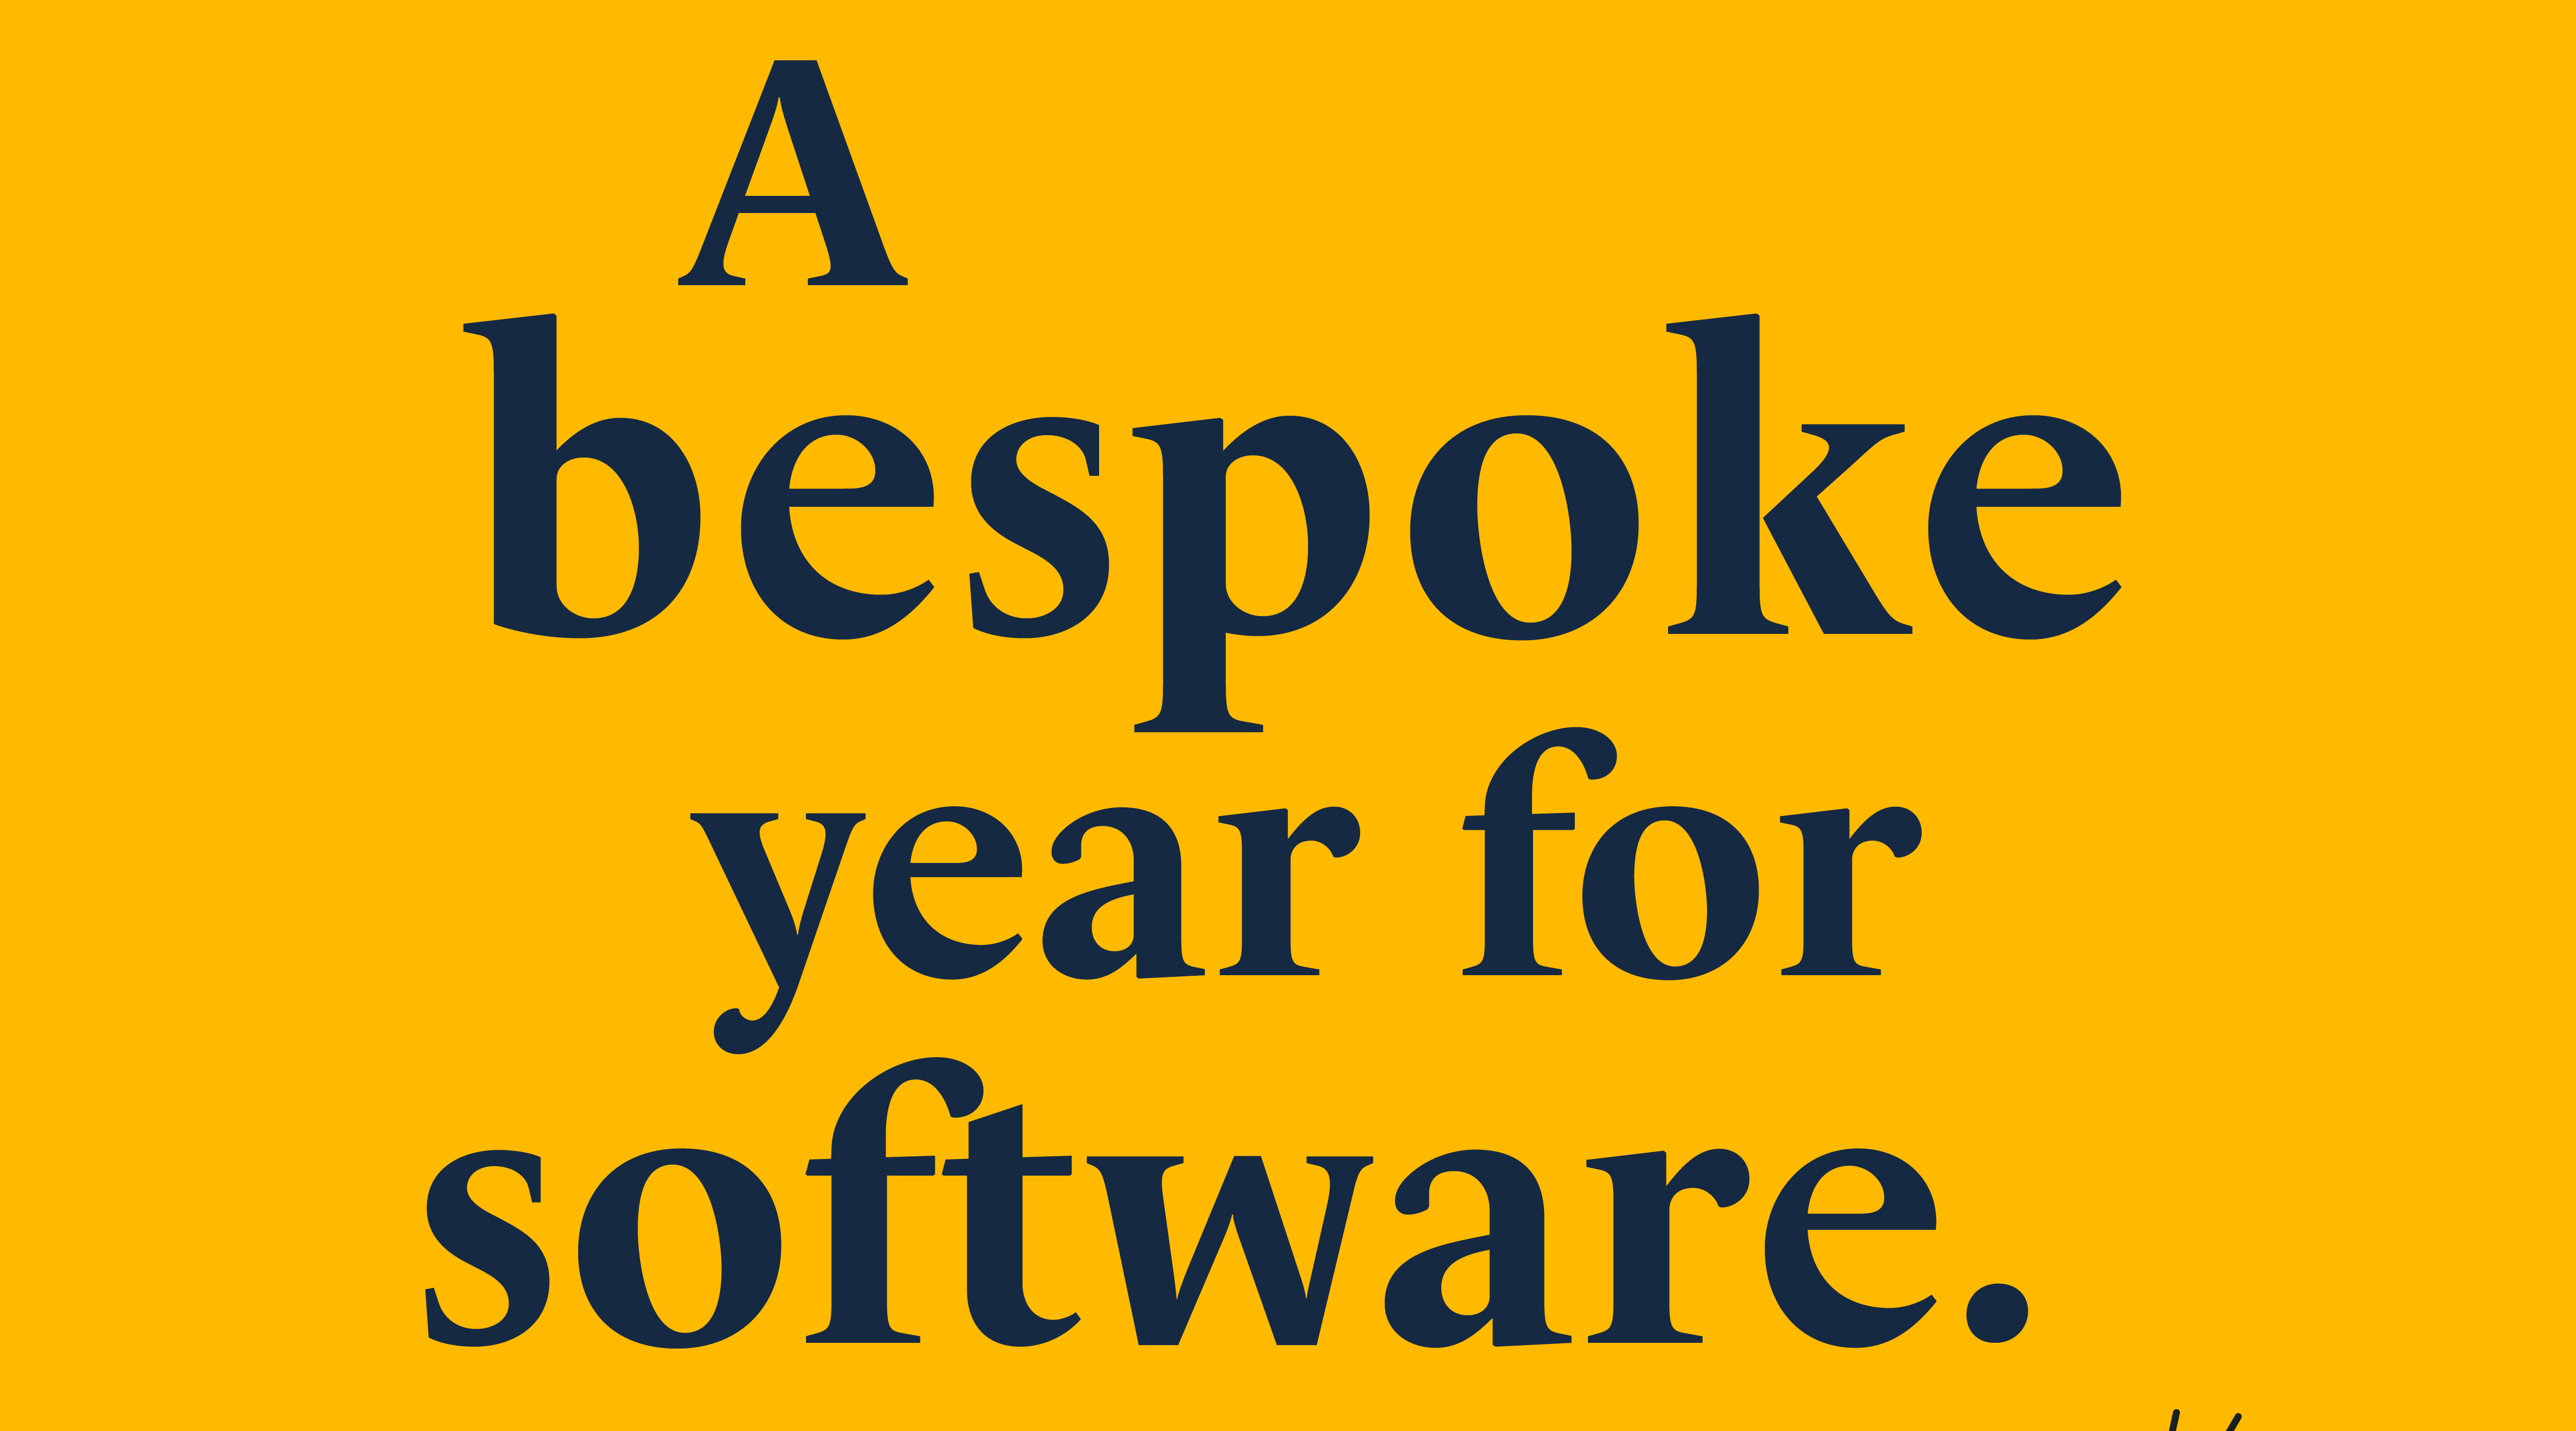 Bespoke year for software